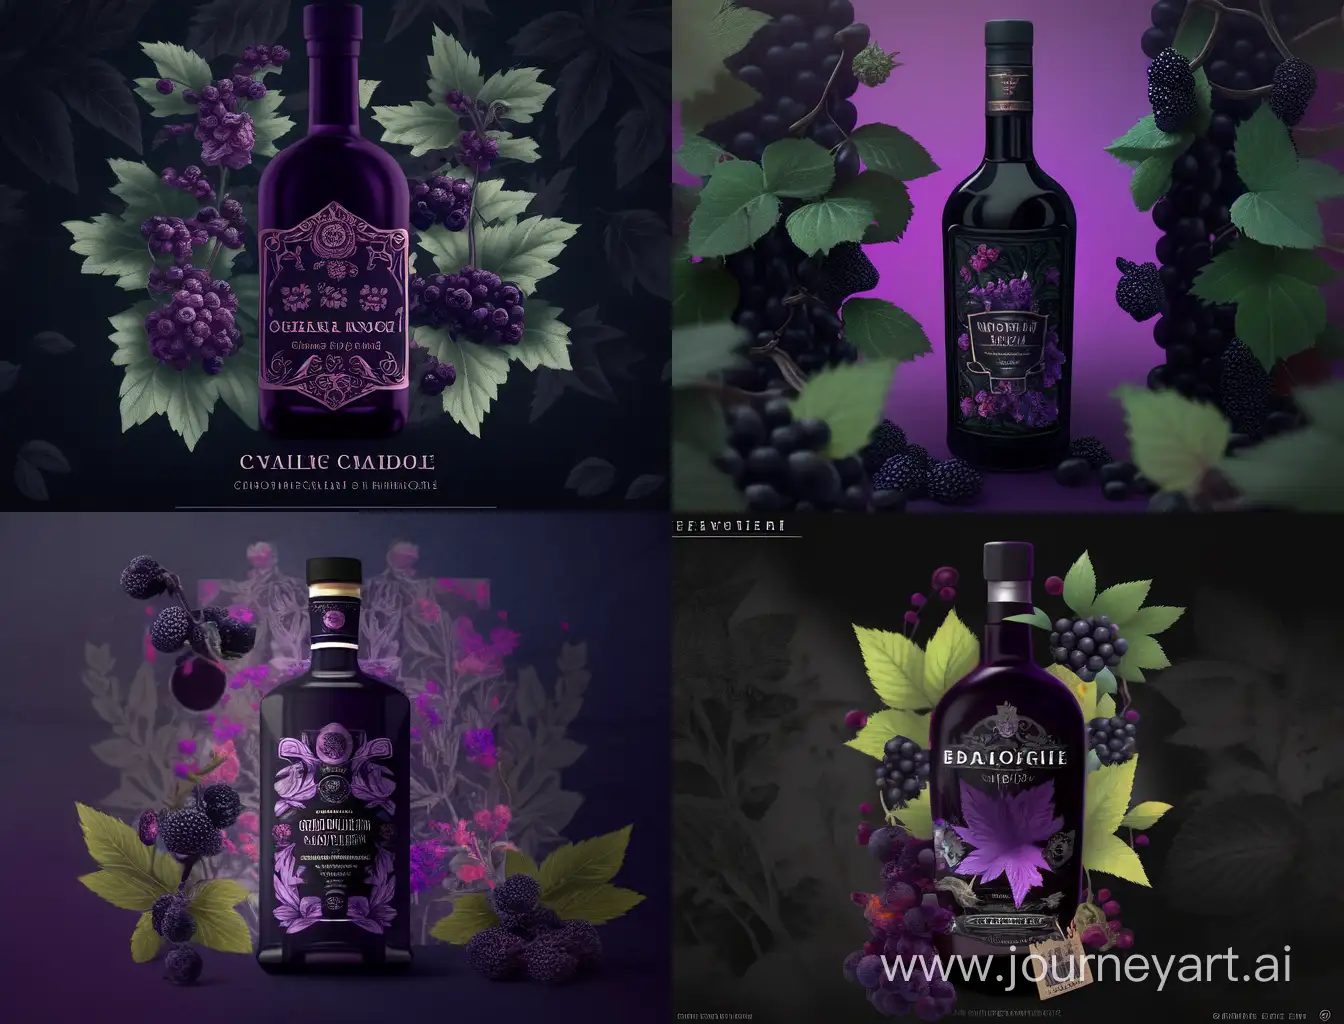 liquor label, craft, violette and purple colors, black currant berries and leaves, fantasy gothic style dark shades